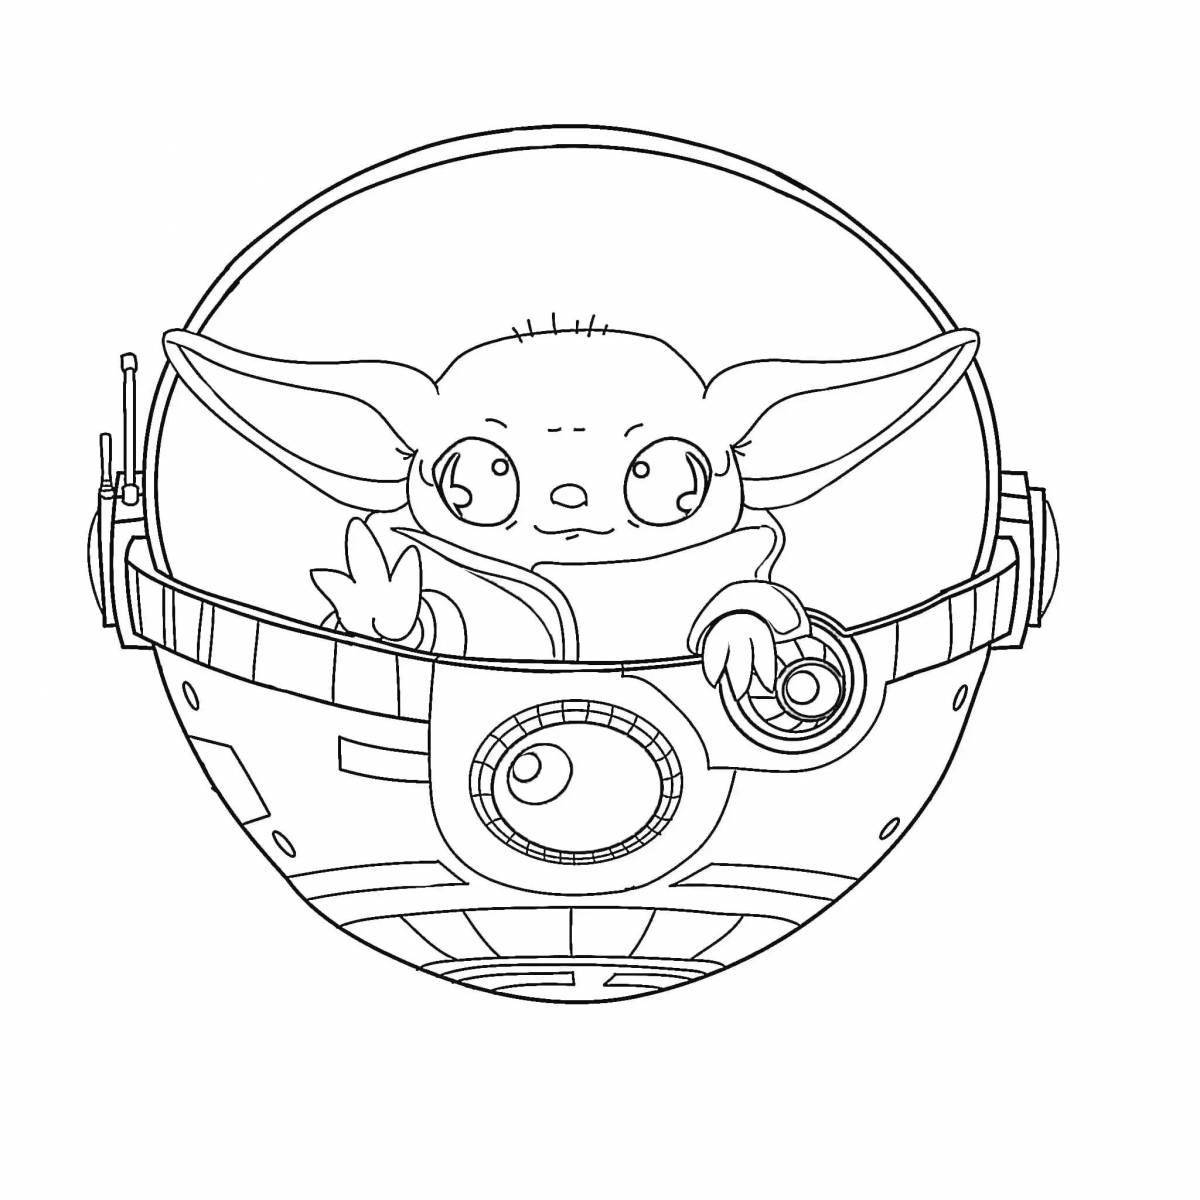 Charon glowing baby coloring page